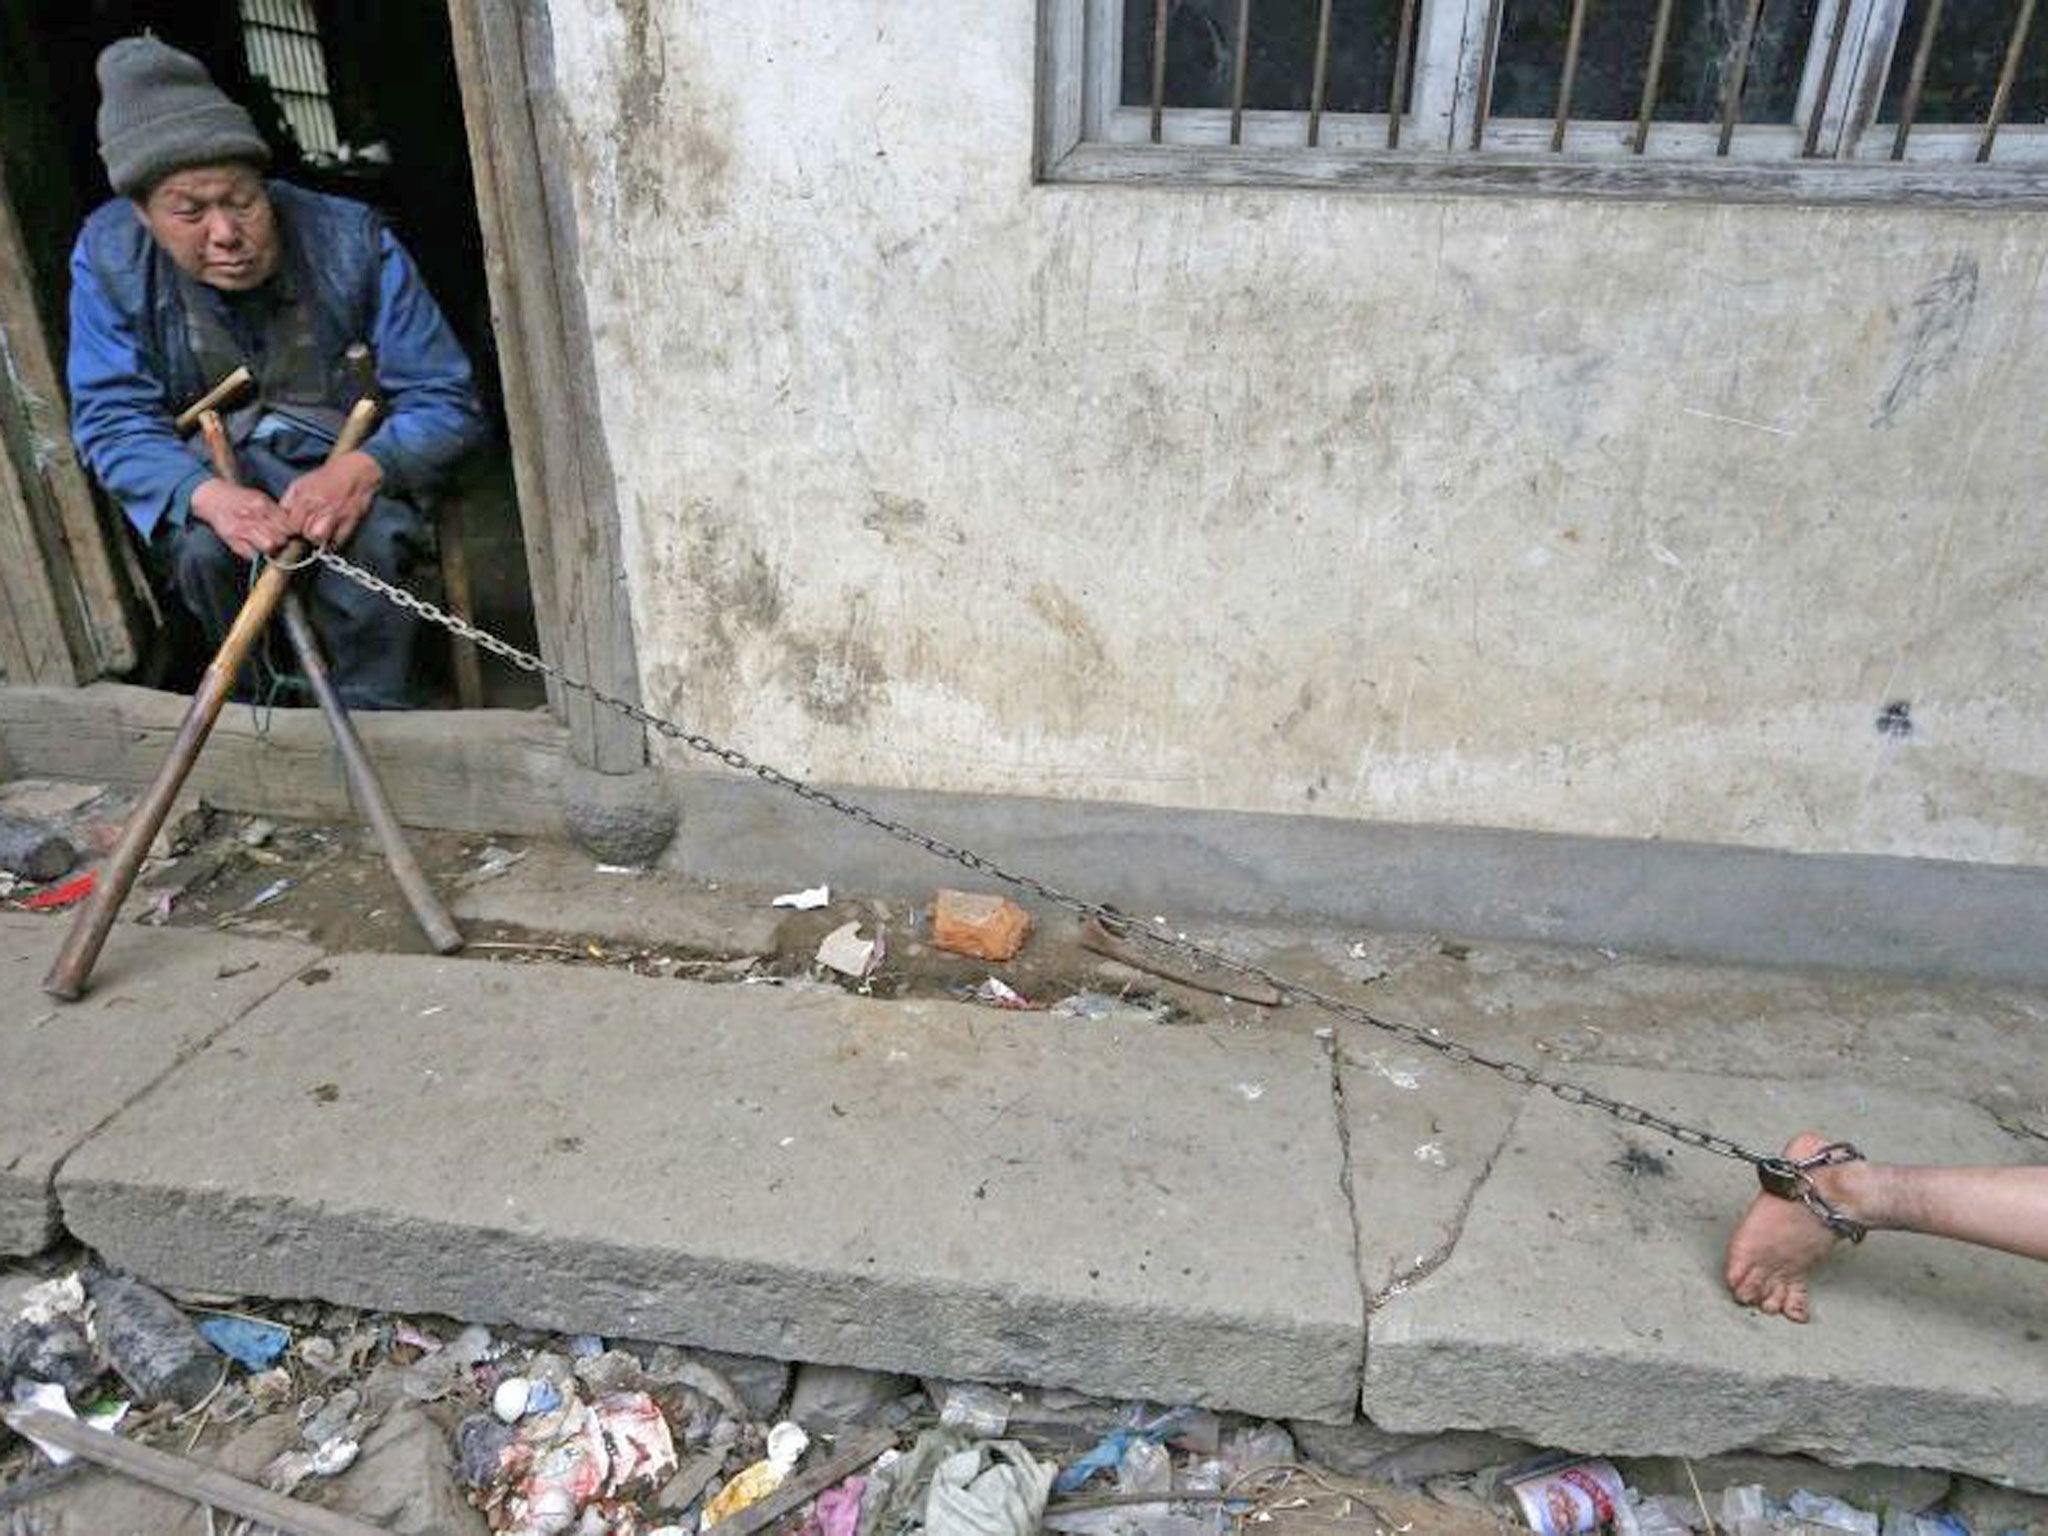 Chained Zili is looked after by his paralyzed grandfather as his plays outside their home in China